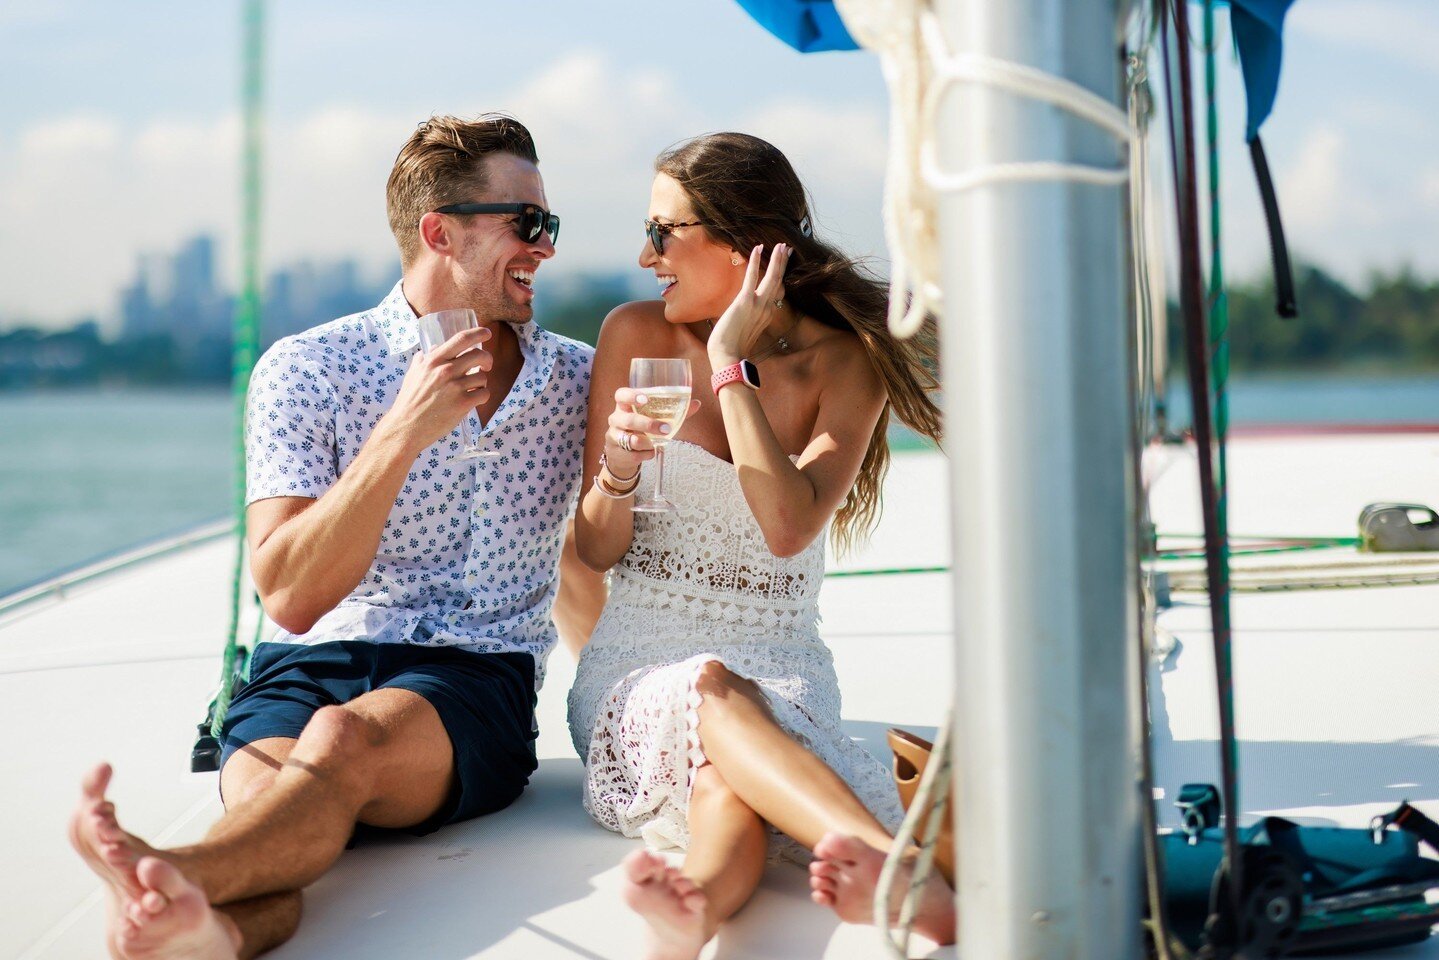 Looking for special ways to celebrate an occasion with your other half? 
The gentle breeze, the sun on your skin, your favourite person and champagne - Is there really any other place that can top such a date?!
#yachtgetaway #romanticgetaway #dateide